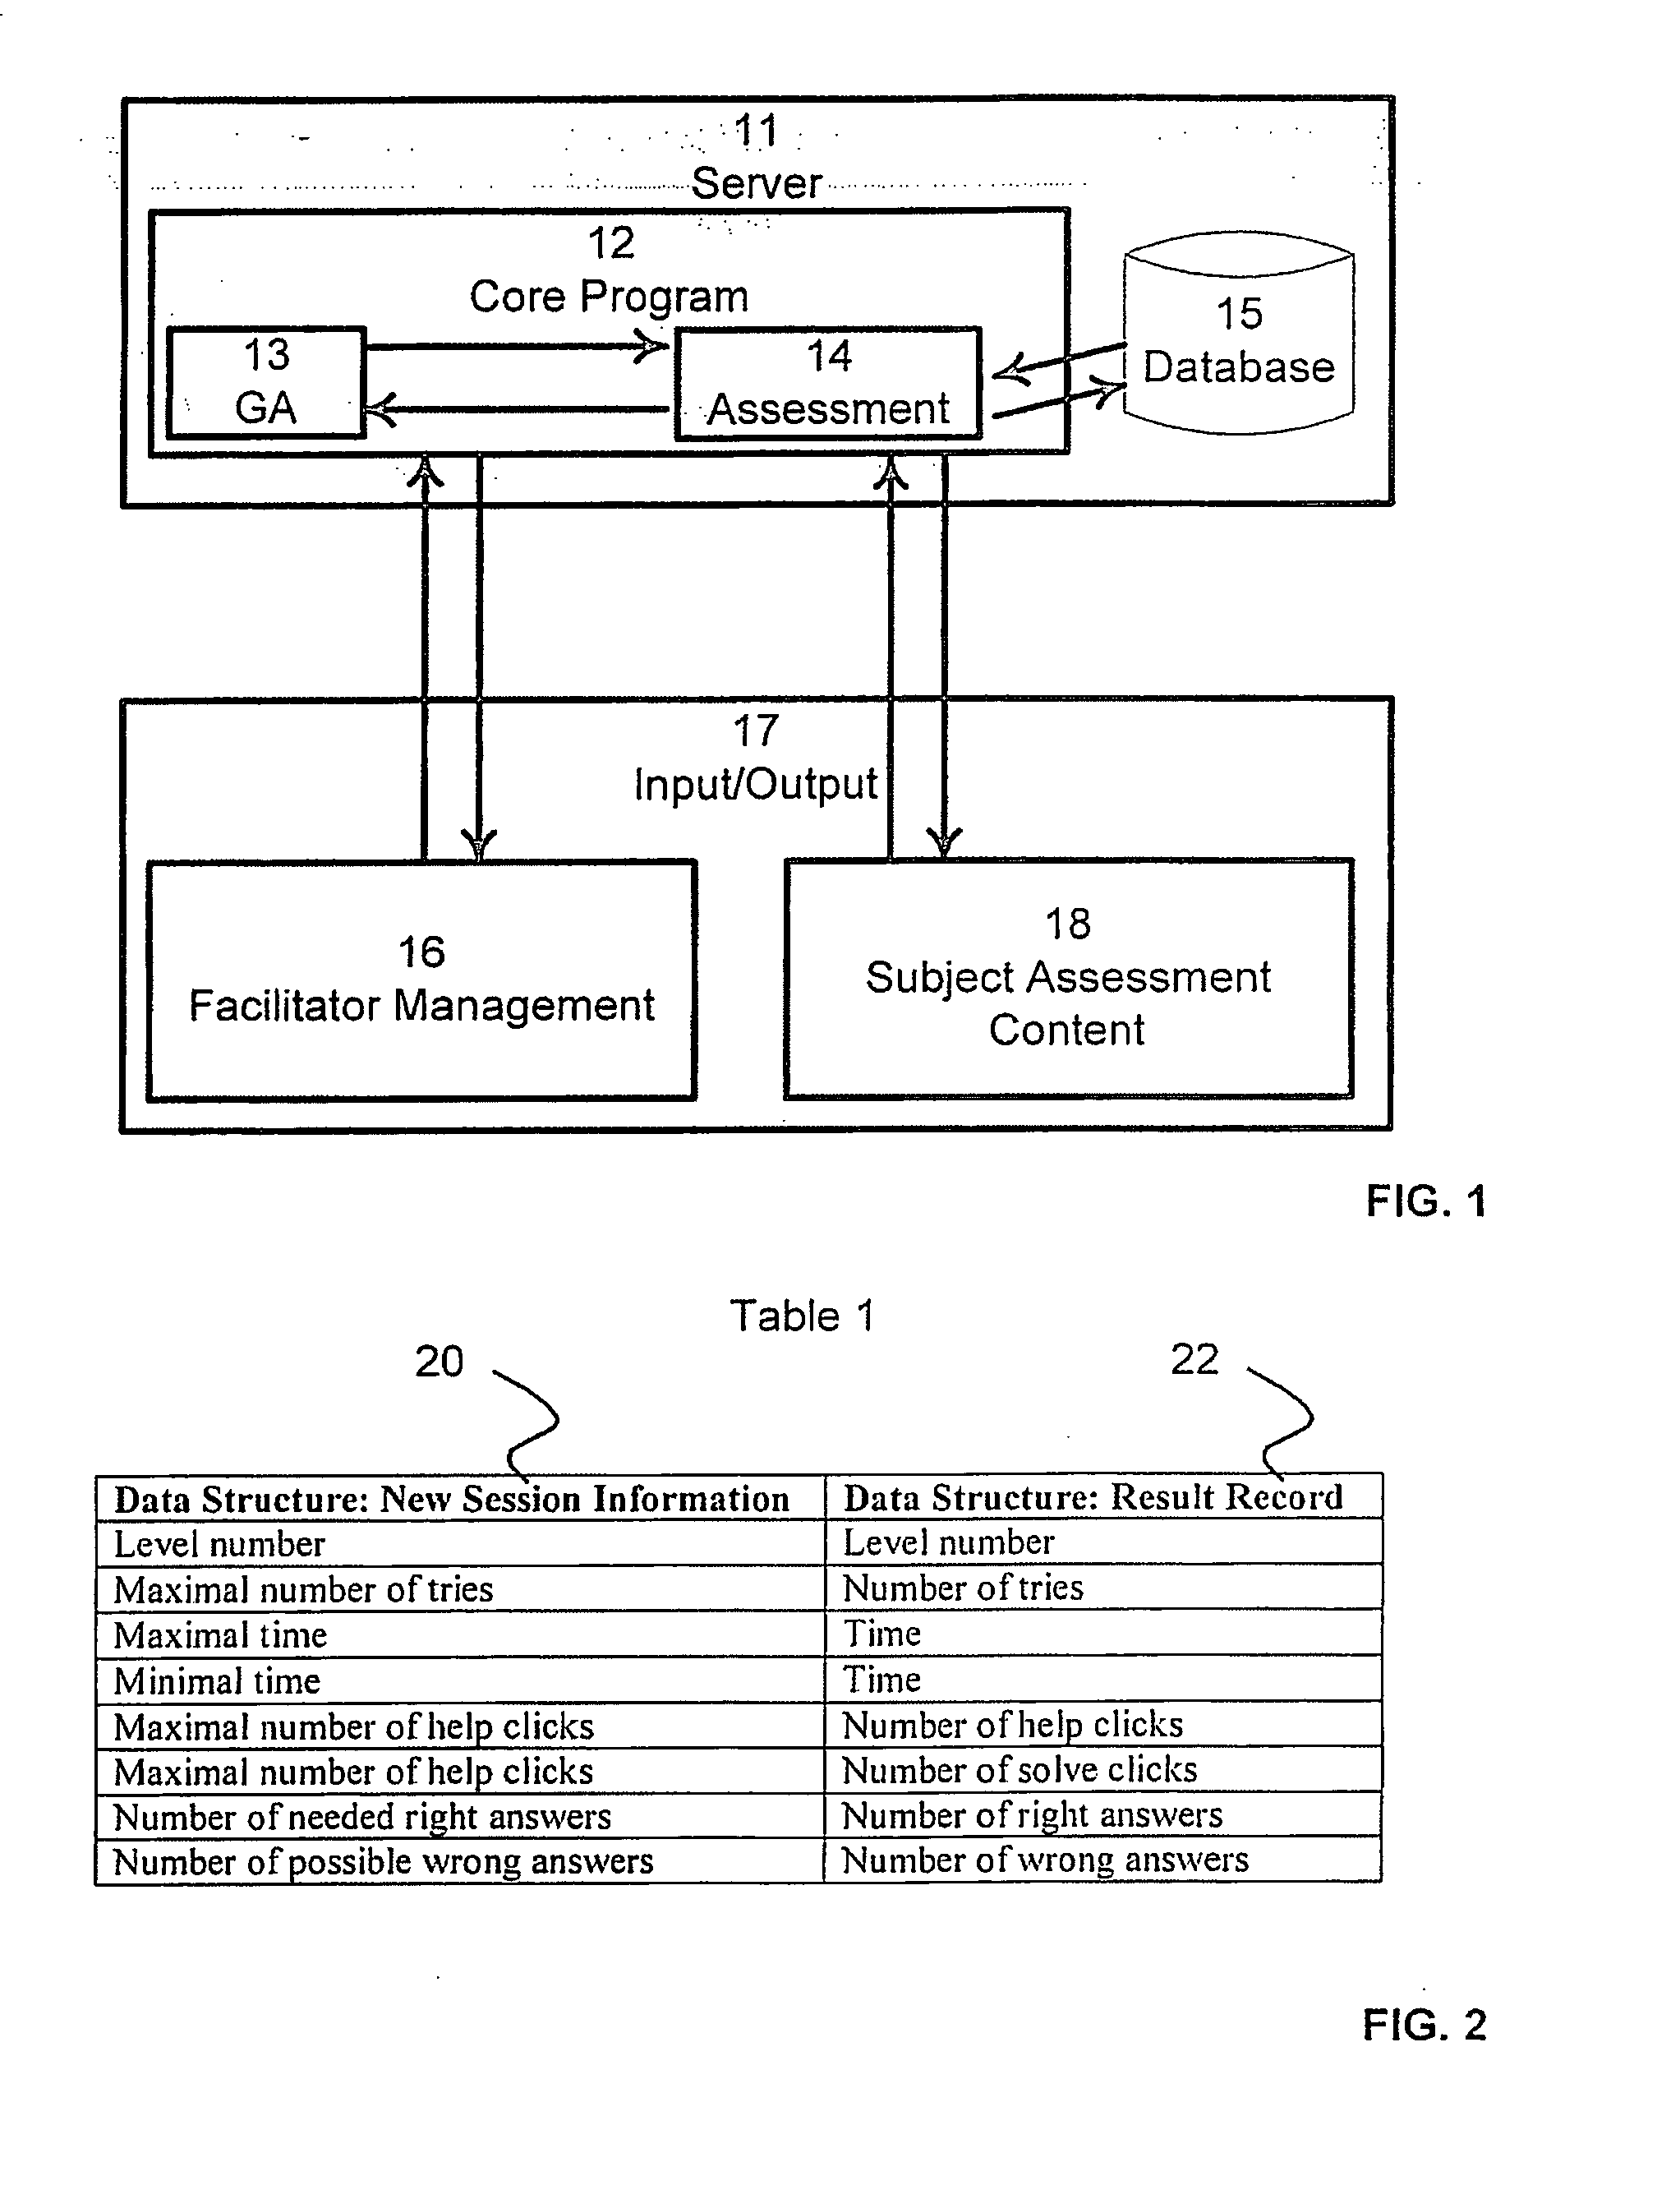 Adaptive computer-based evaluation with constrained genetic algorithm